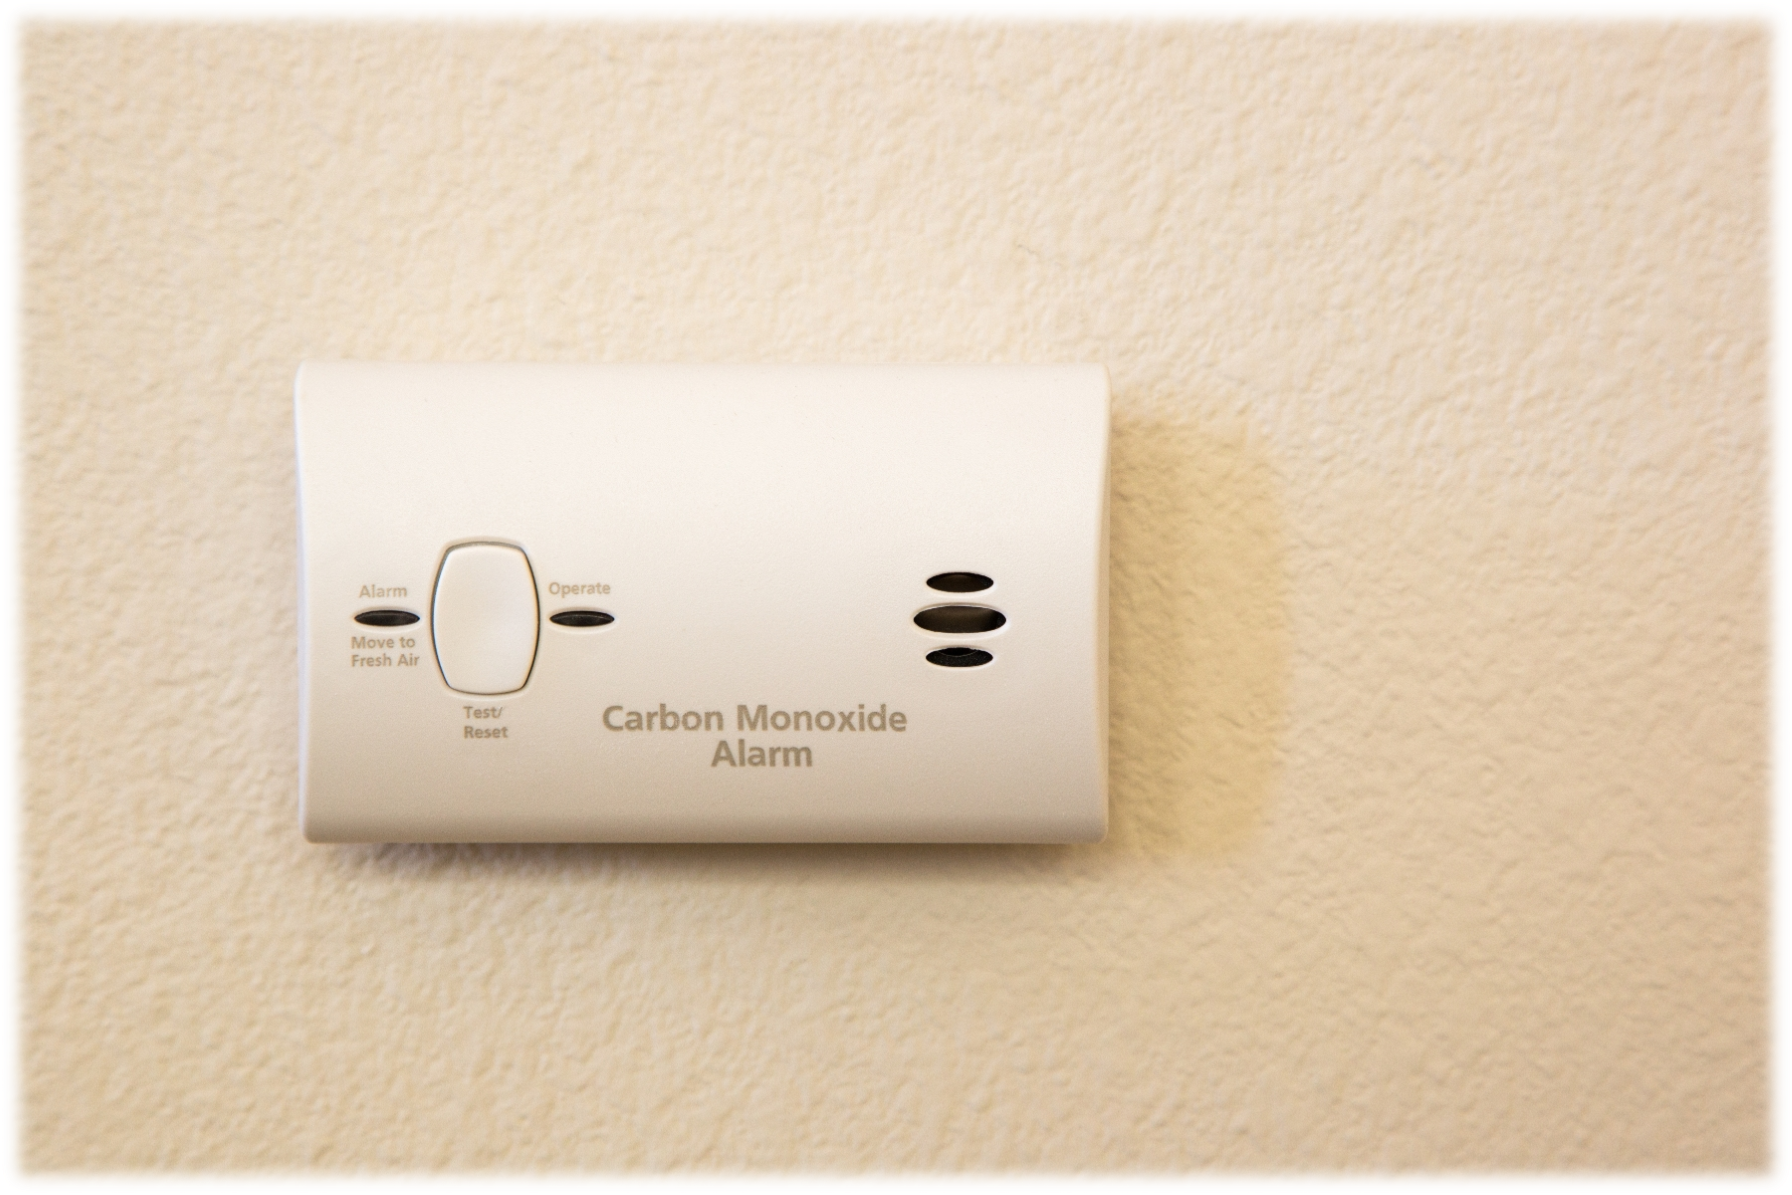 Link to Carbon Monoxide page - Carbon Monoxice meter on wall